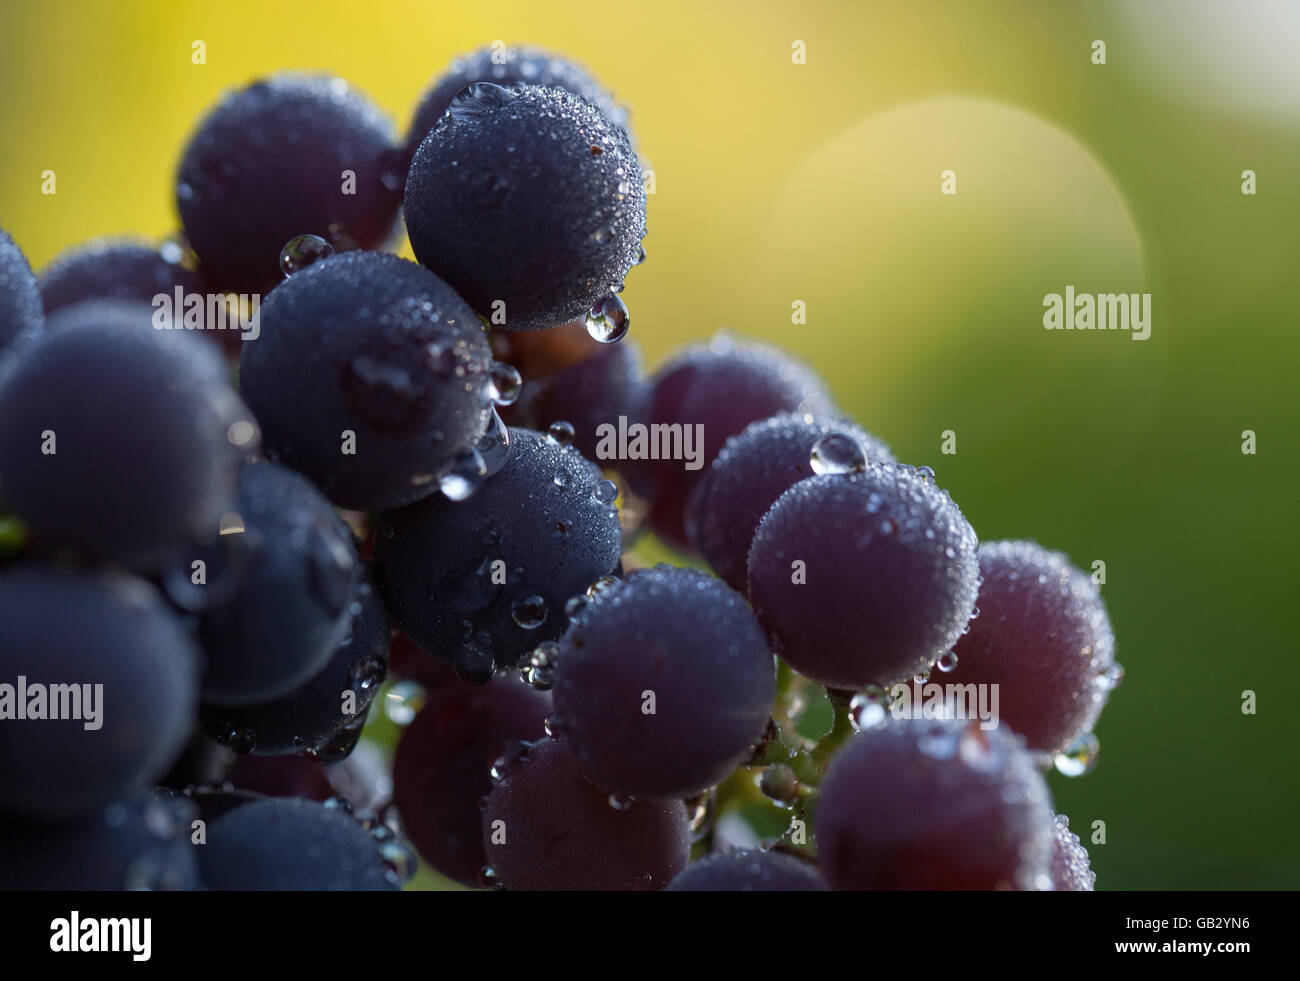 Bunch of Grapes with water droplets Stock Photo